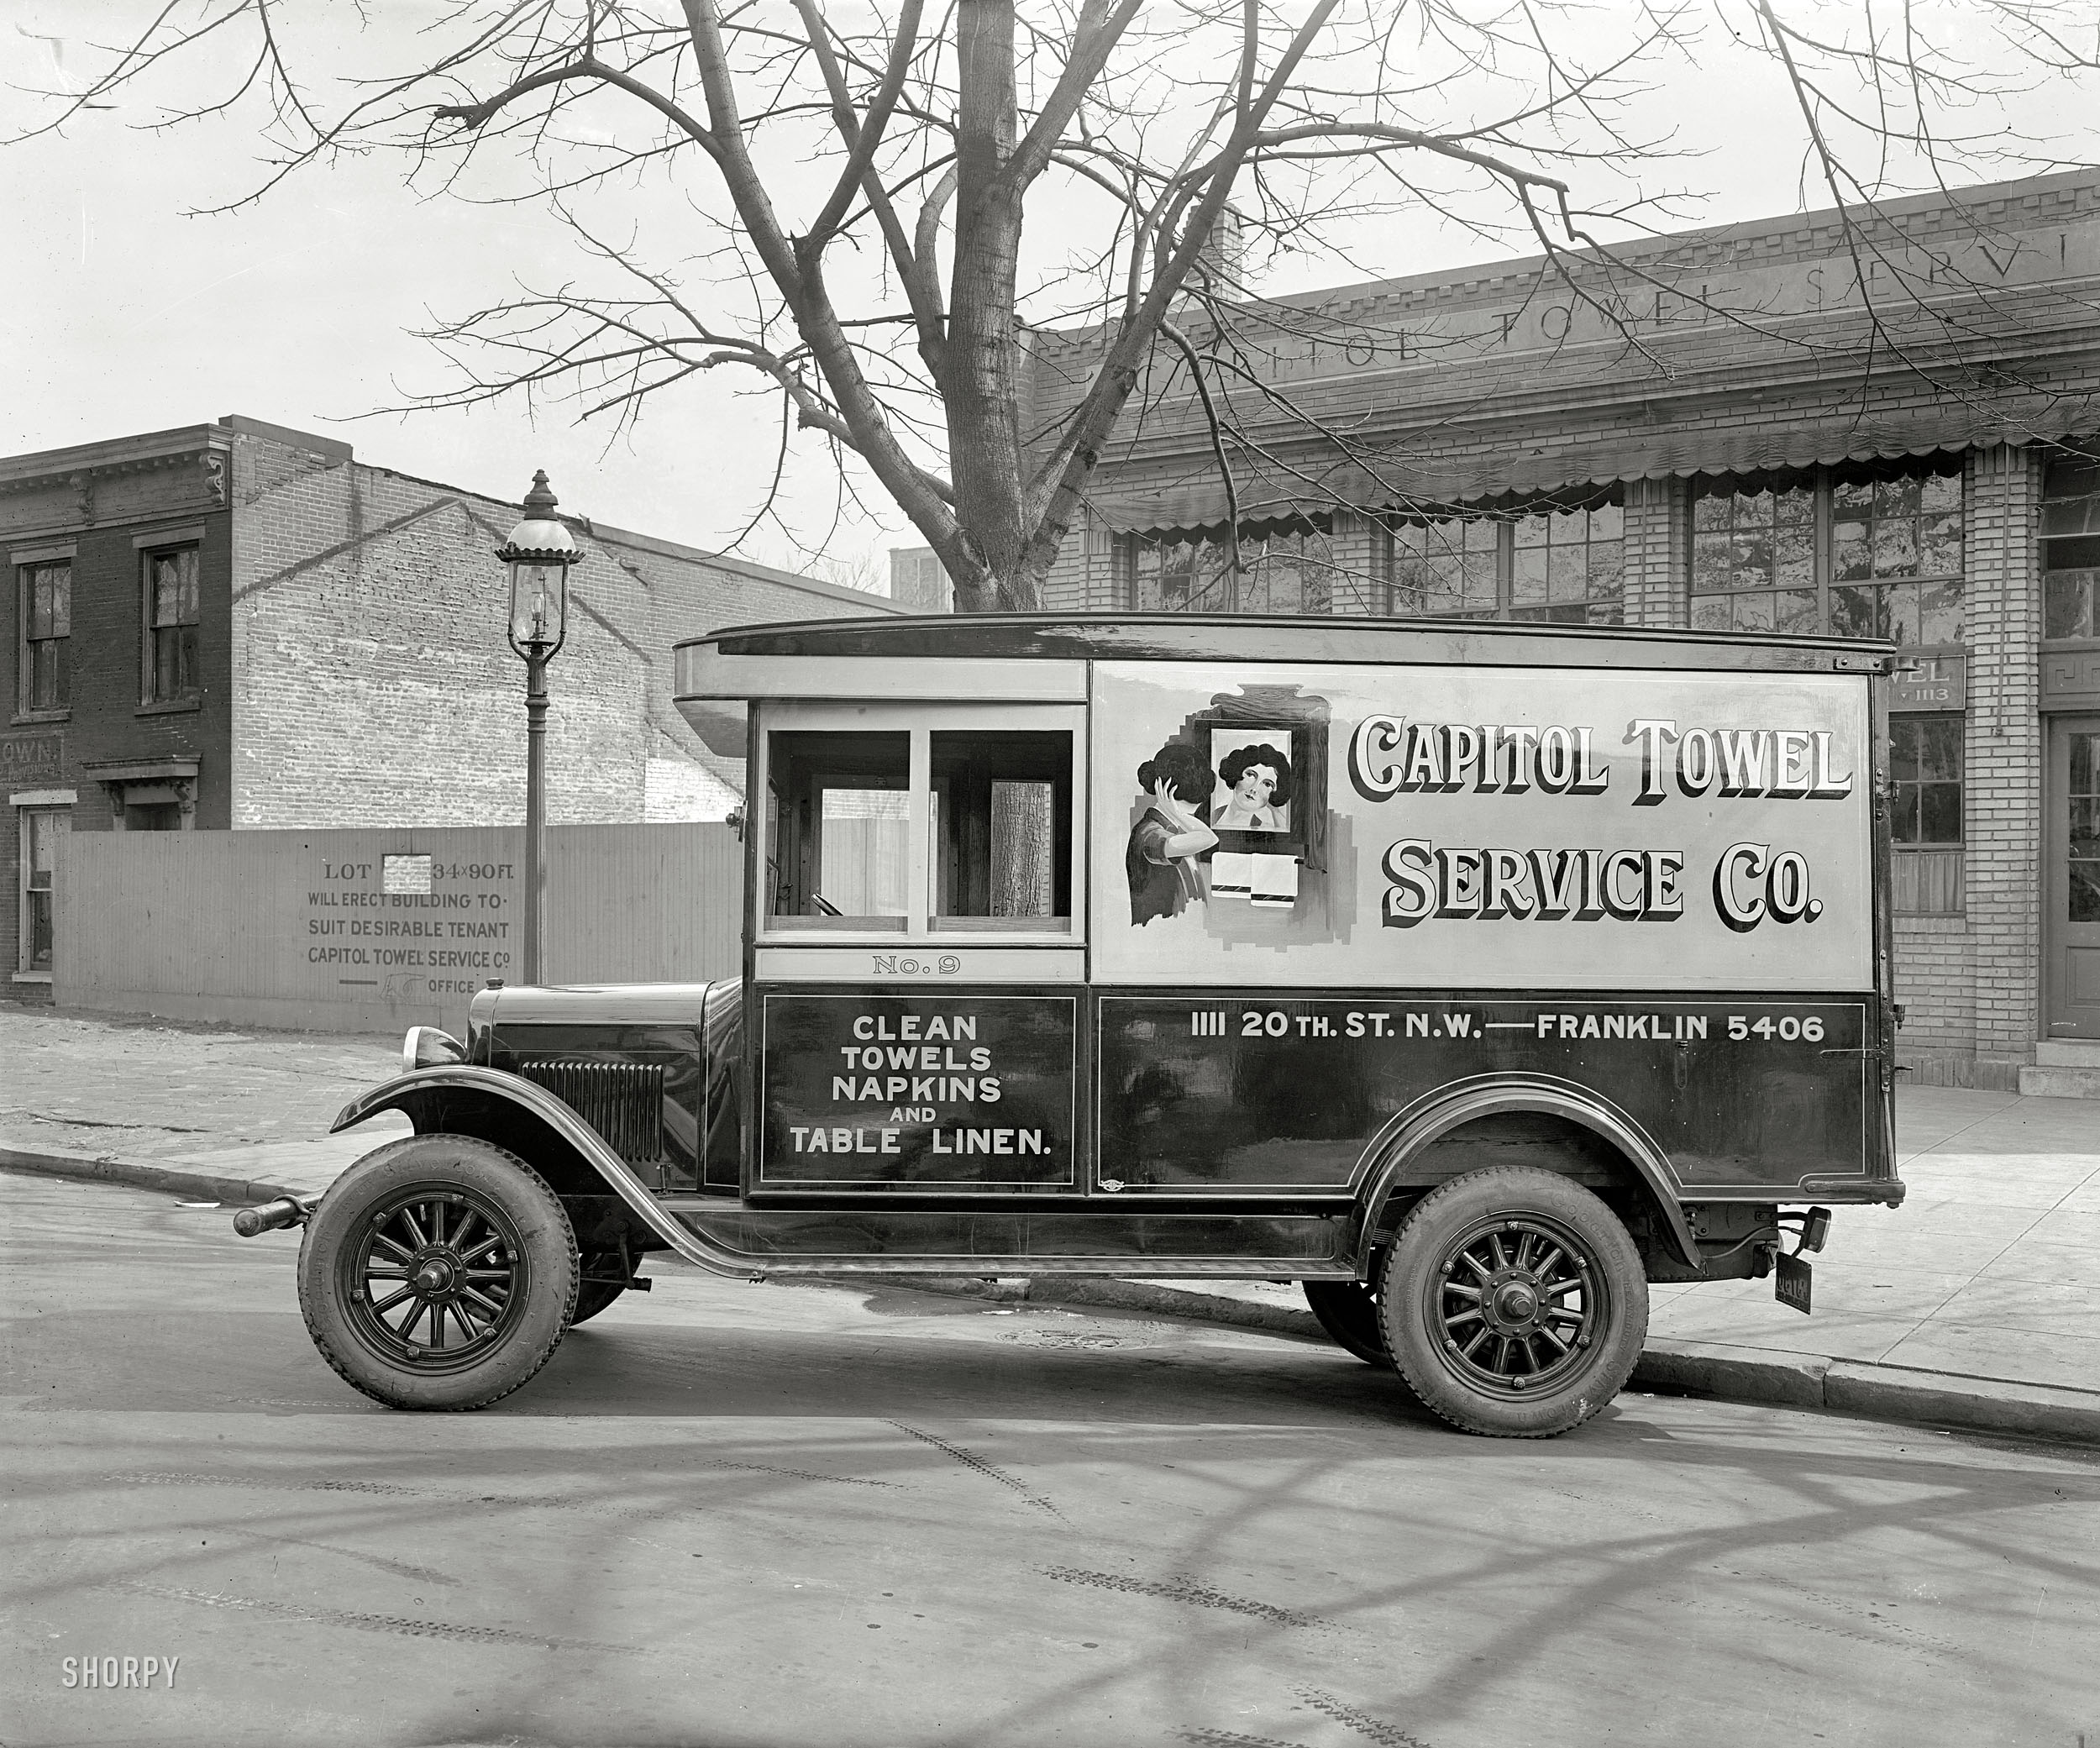 Washington, D.C., circa 1928. "Cap Towel Service truck." Linens for milady. National Photo Company Collection glass negative. View full size.